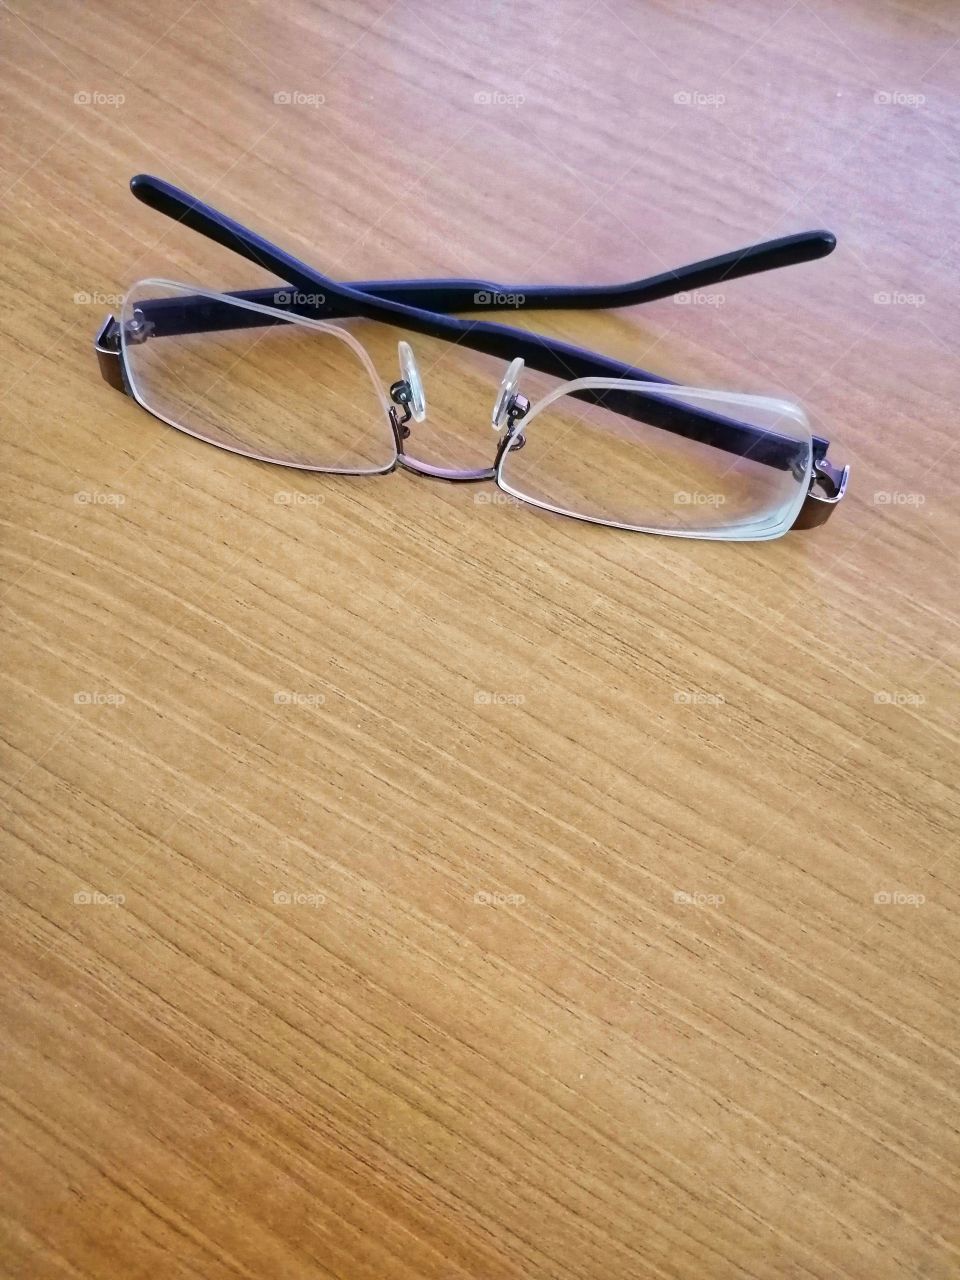 Short-sighted glasses on brown wood floors